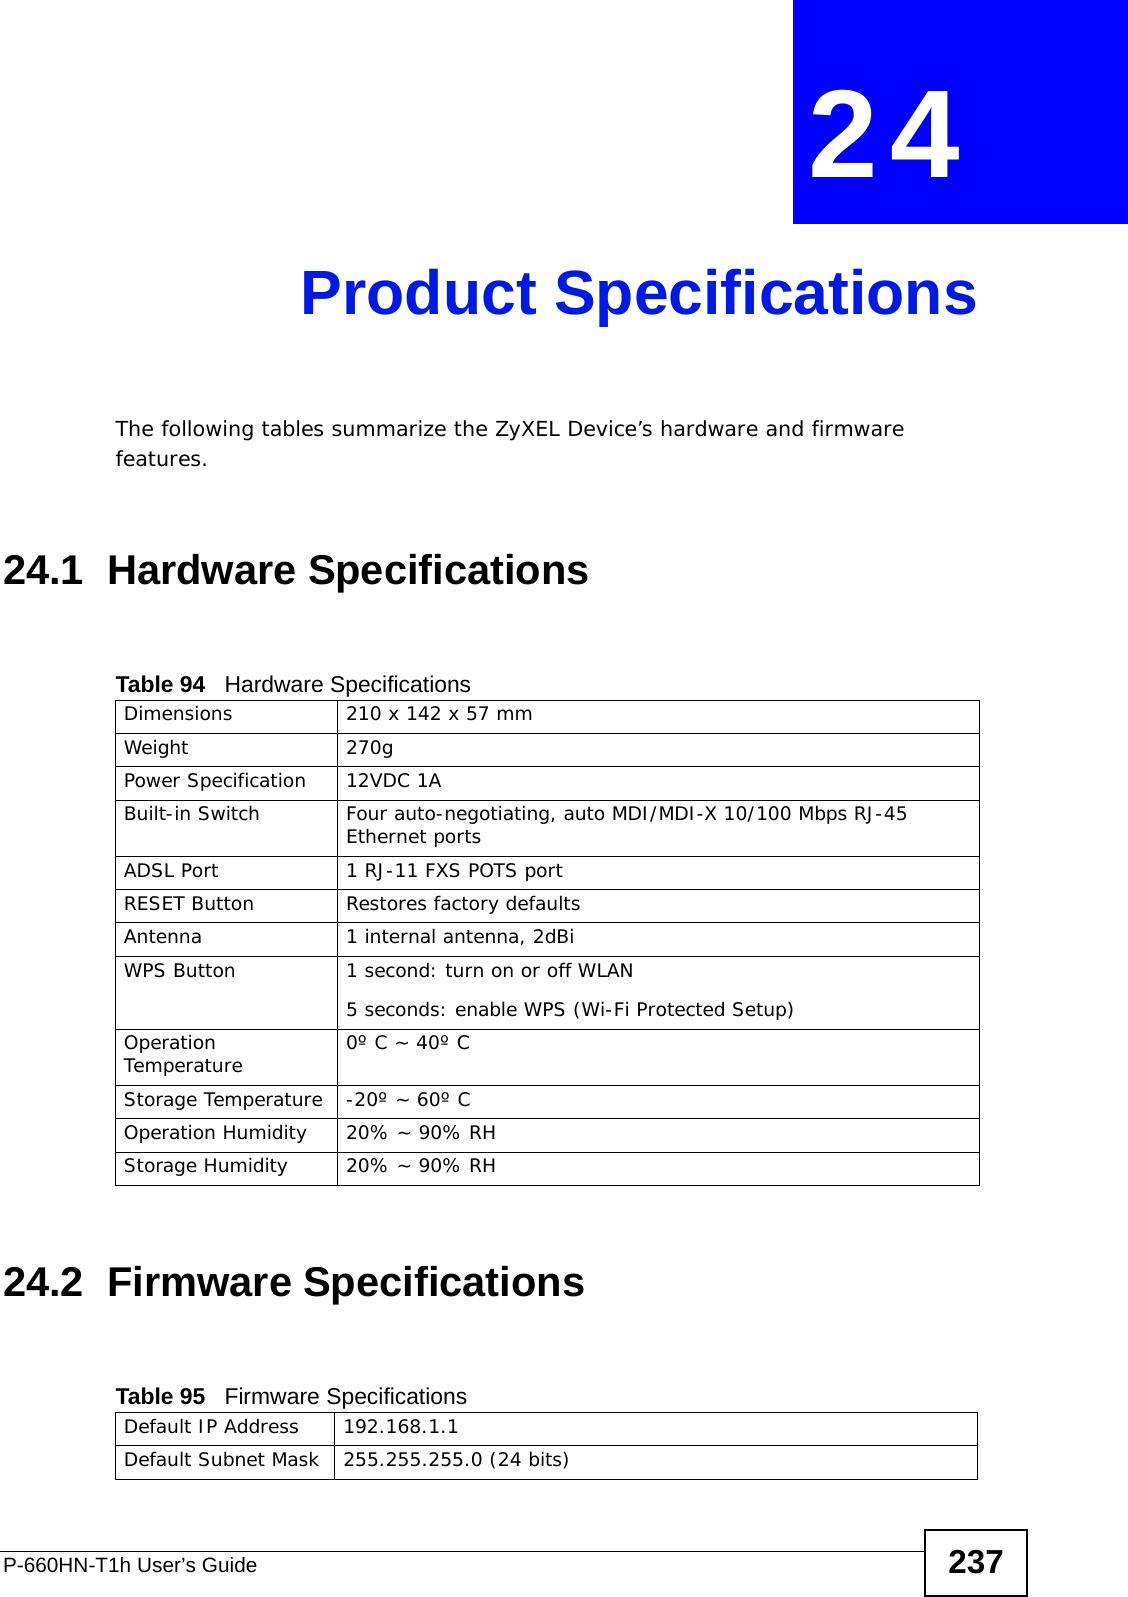 P-660HN-T1h User’s Guide 237CHAPTER  24 Product SpecificationsThe following tables summarize the ZyXEL Device’s hardware and firmware features.24.1  Hardware Specifications24.2  Firmware SpecificationsTable 94   Hardware SpecificationsDimensions 210 x 142 x 57 mmWeight 270gPower Specification 12VDC 1ABuilt-in Switch Four auto-negotiating, auto MDI/MDI-X 10/100 Mbps RJ-45 Ethernet portsADSL Port 1 RJ-11 FXS POTS portRESET Button Restores factory defaultsAntenna 1 internal antenna, 2dBiWPS Button 1 second: turn on or off WLAN5 seconds: enable WPS (Wi-Fi Protected Setup)Operation Temperature 0º C ~ 40º CStorage Temperature -20º ~ 60º COperation Humidity 20% ~ 90% RHStorage Humidity 20% ~ 90% RHTable 95   Firmware Specifications Default IP Address 192.168.1.1Default Subnet Mask 255.255.255.0 (24 bits)